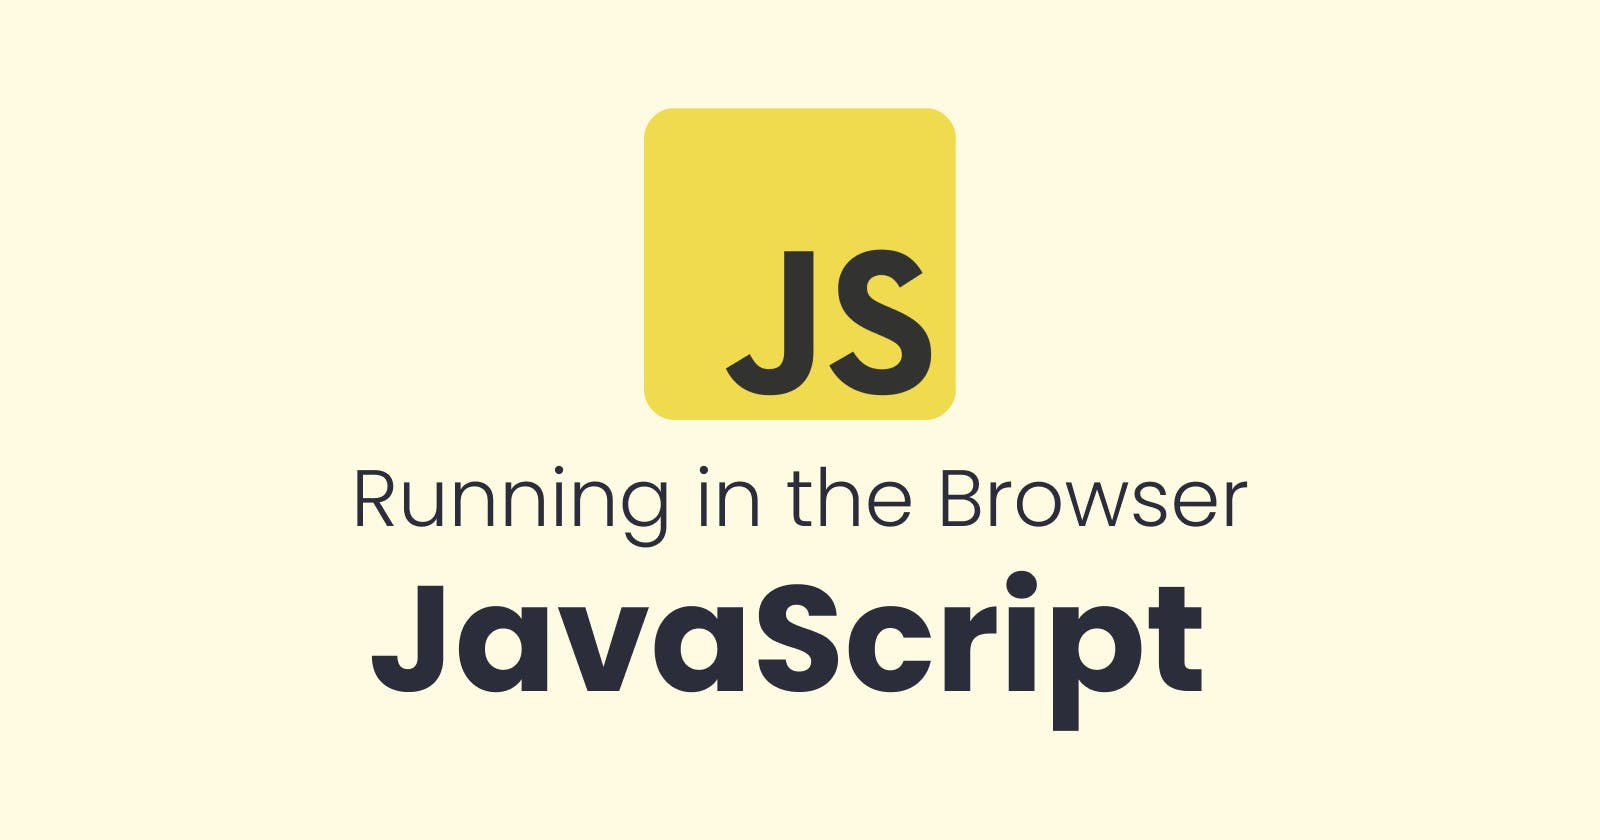 Running JavaScript in the Browser